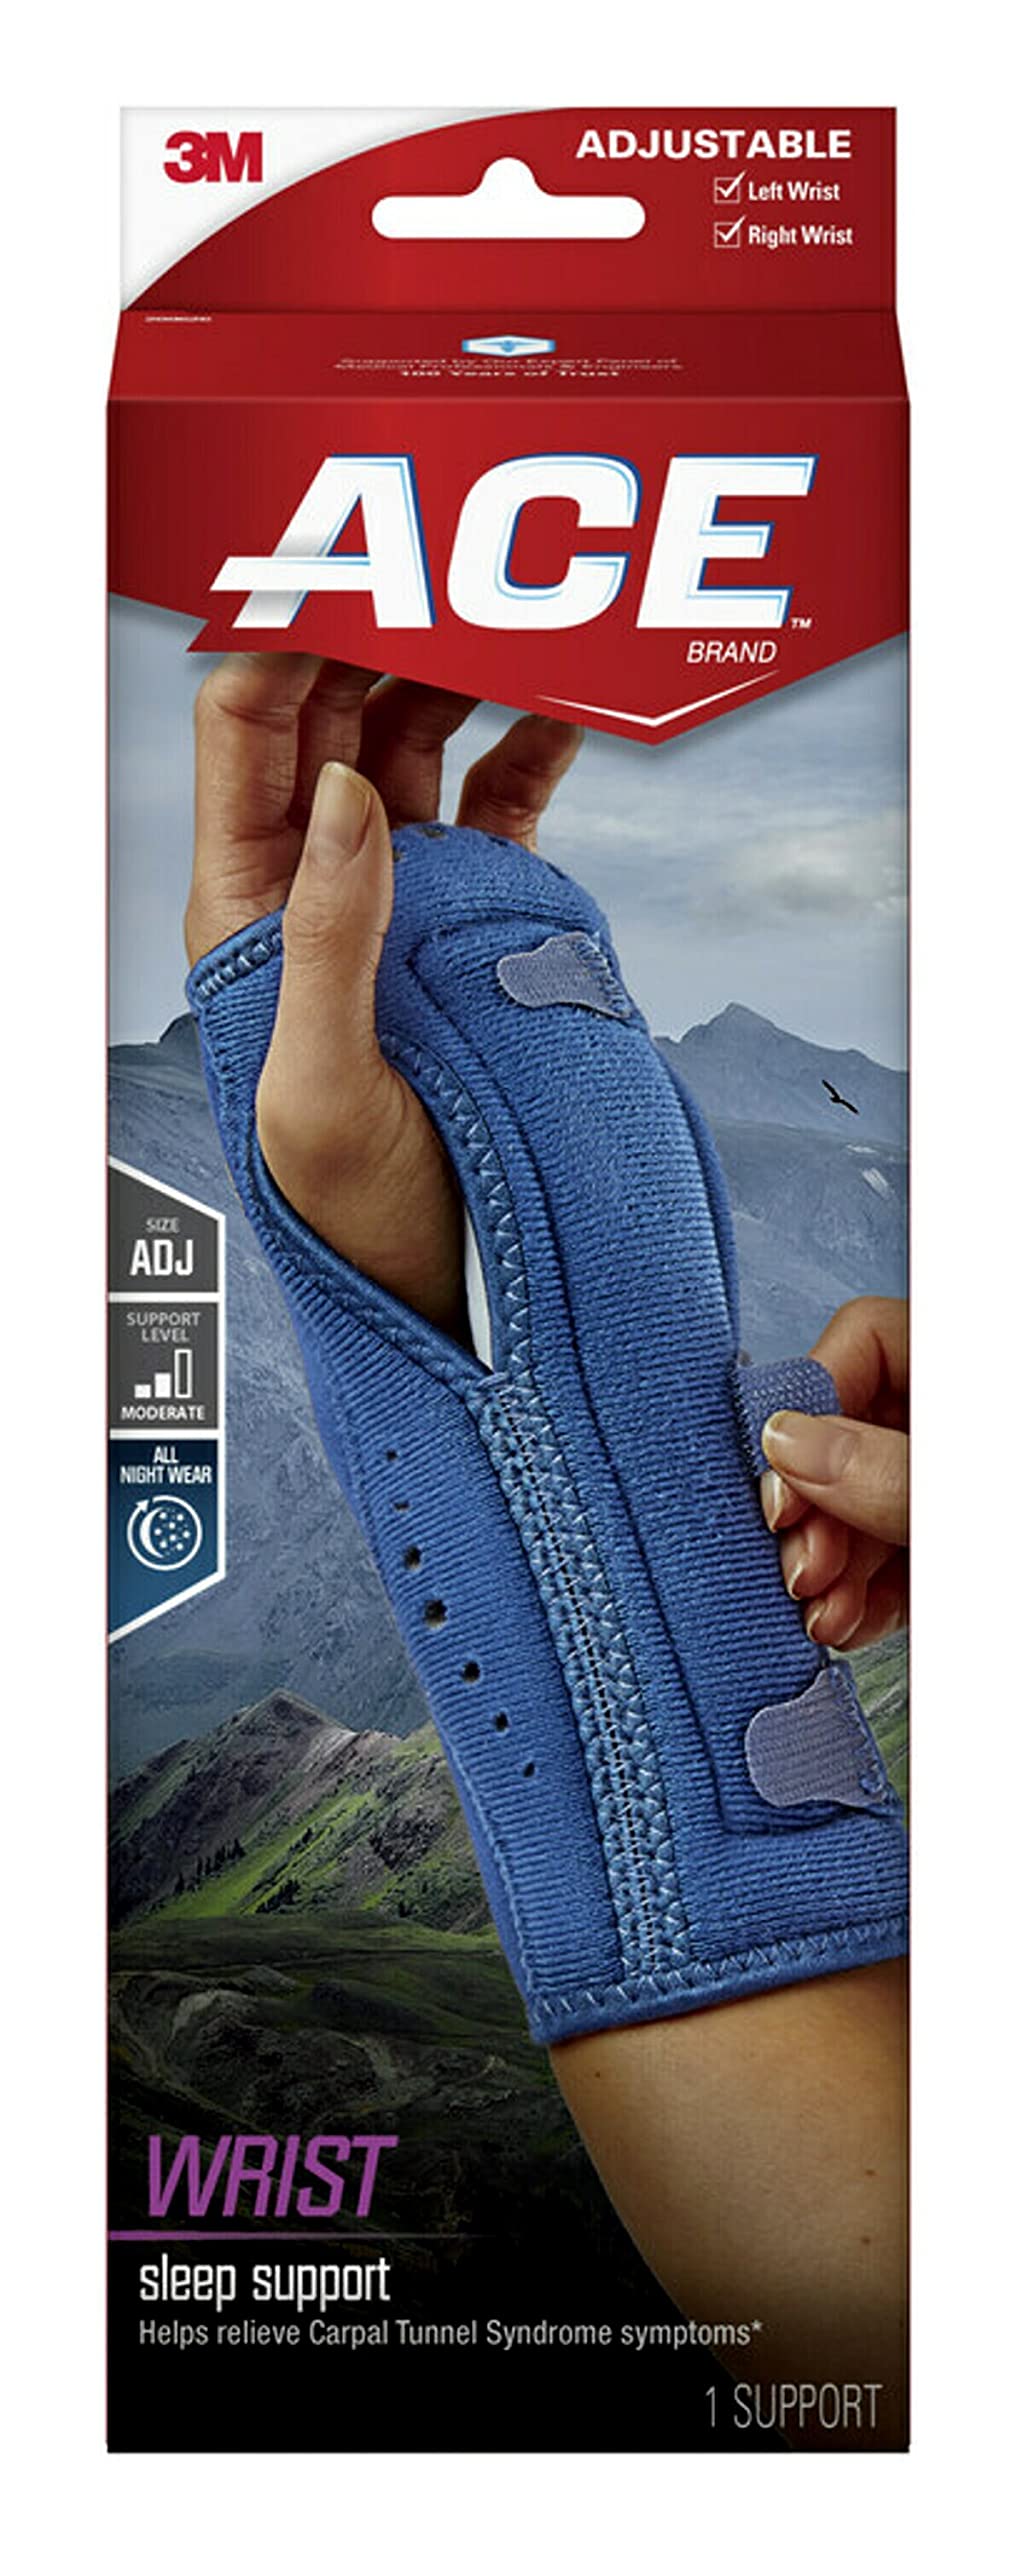 ACE Night Wrist Sleep Support, Adjustable, Blue, Helps Provide Relief from  Symptoms of Carpal Tunnel Syndrome